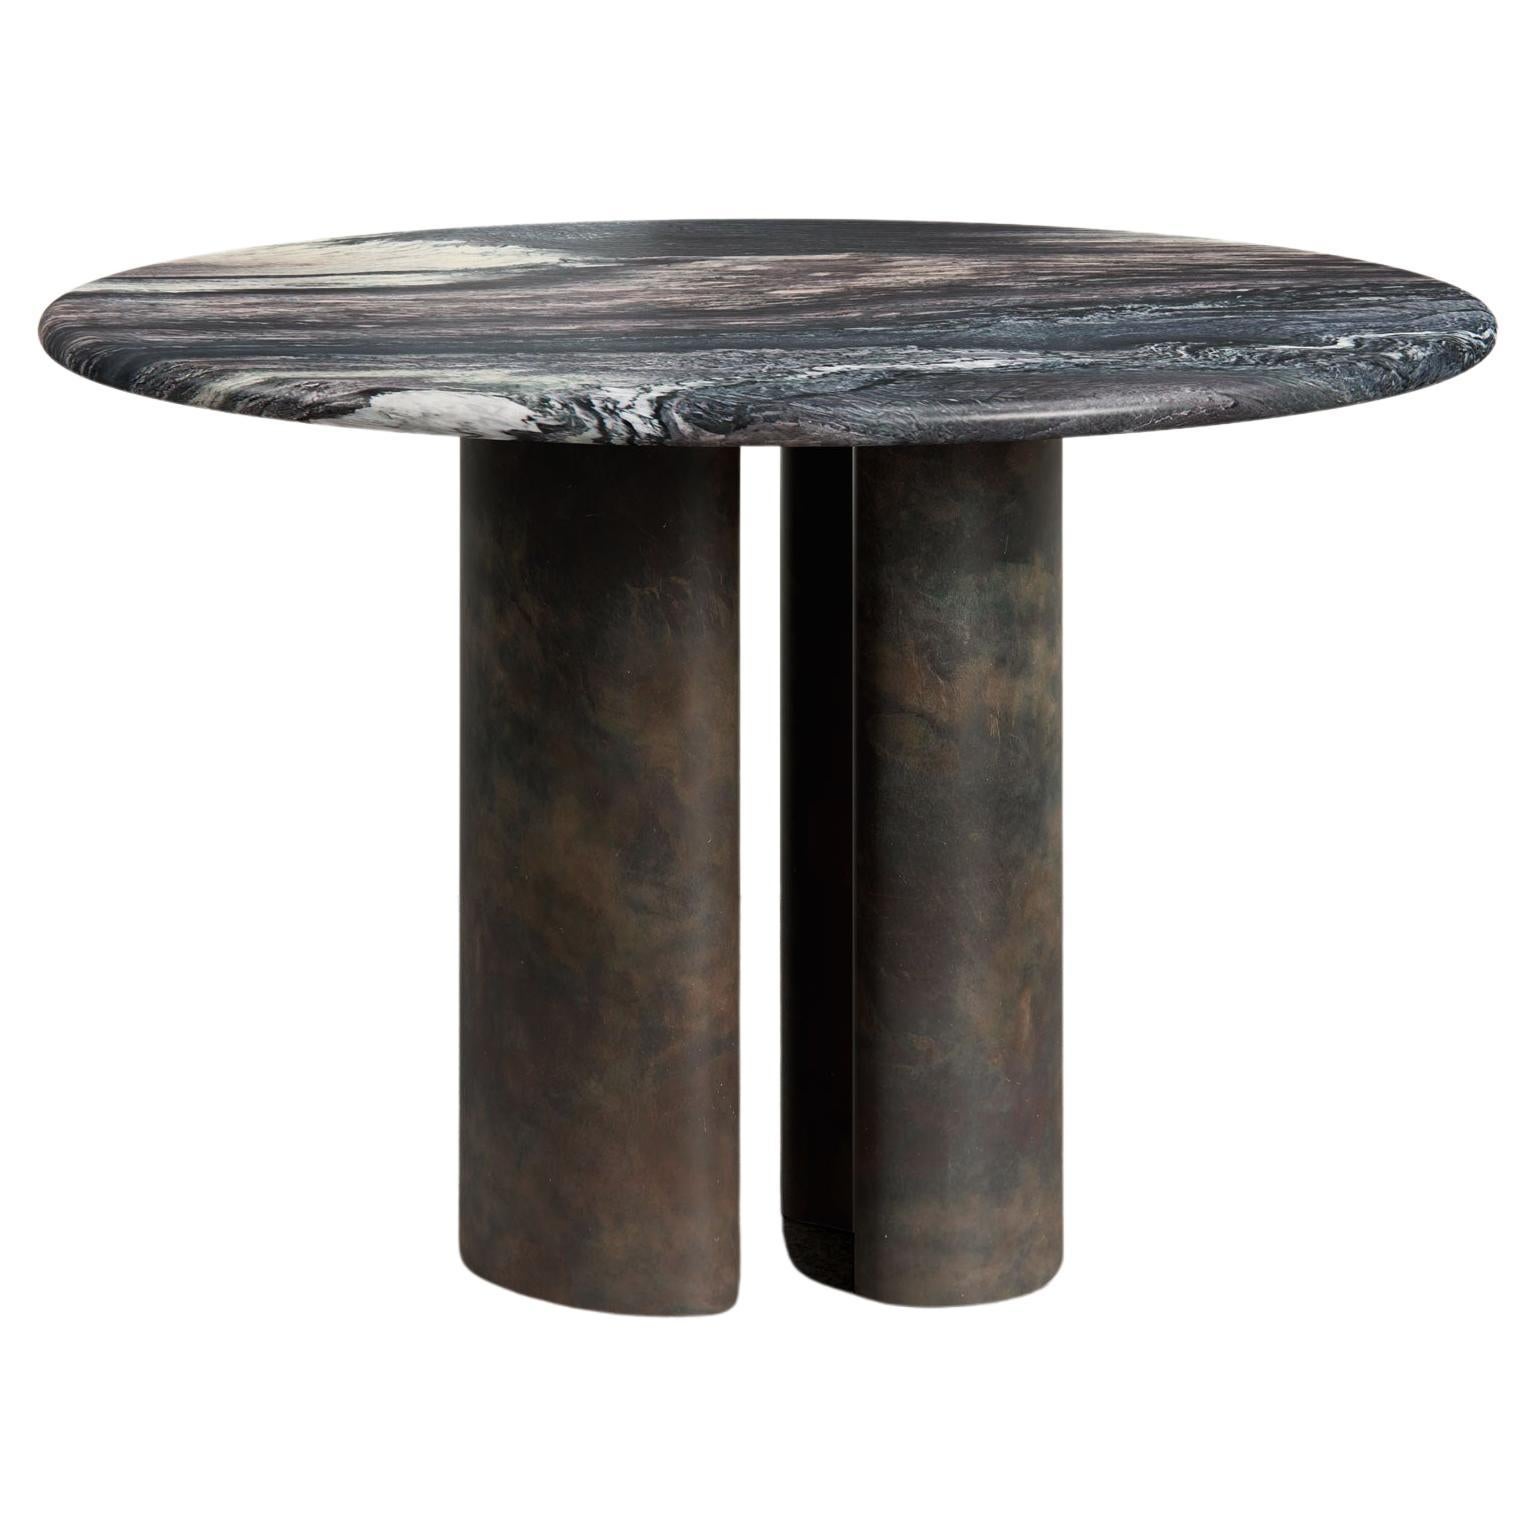 Pietra Dining Table by Just Adele in Bronza Patina and Cipollino Ondulato